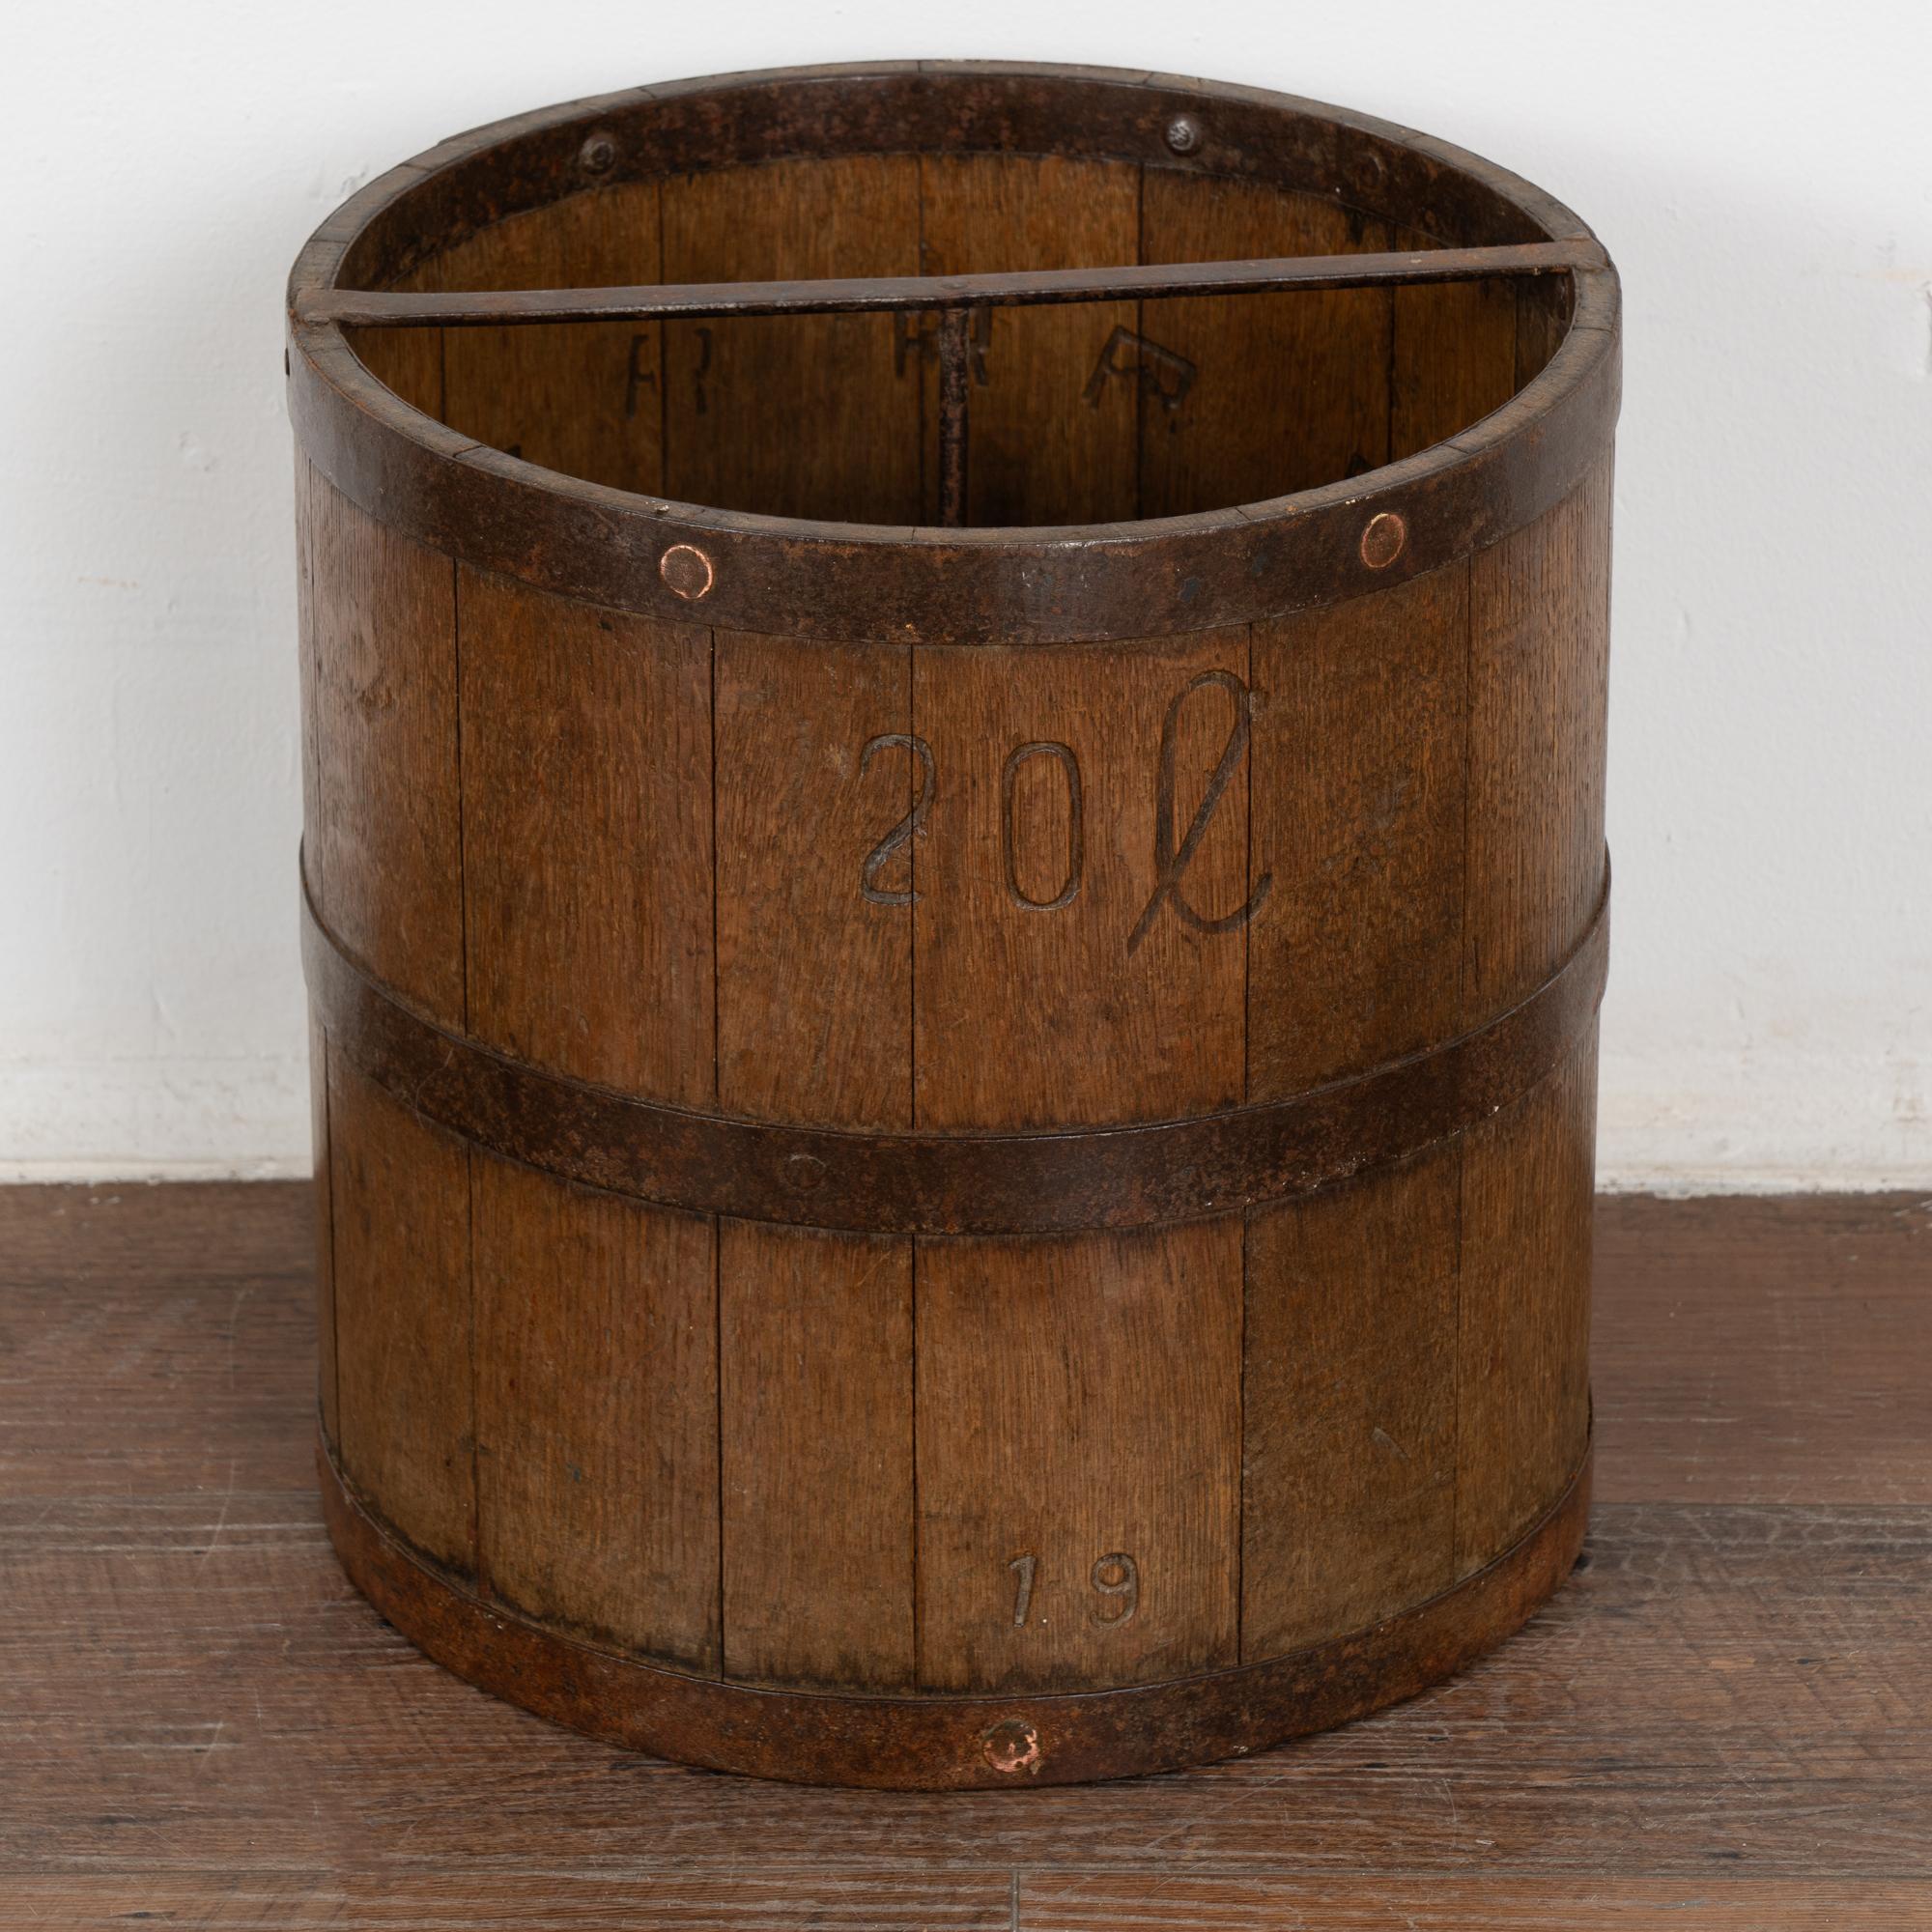 20 liter old oak measuring bucket with iron banding. 
Iron cross bar and central rod that connects cross bar to bottom of bucket interior. 
In stable, waxed condition.
Any scratches, cracks, dings, or age related separation are reflective of age and